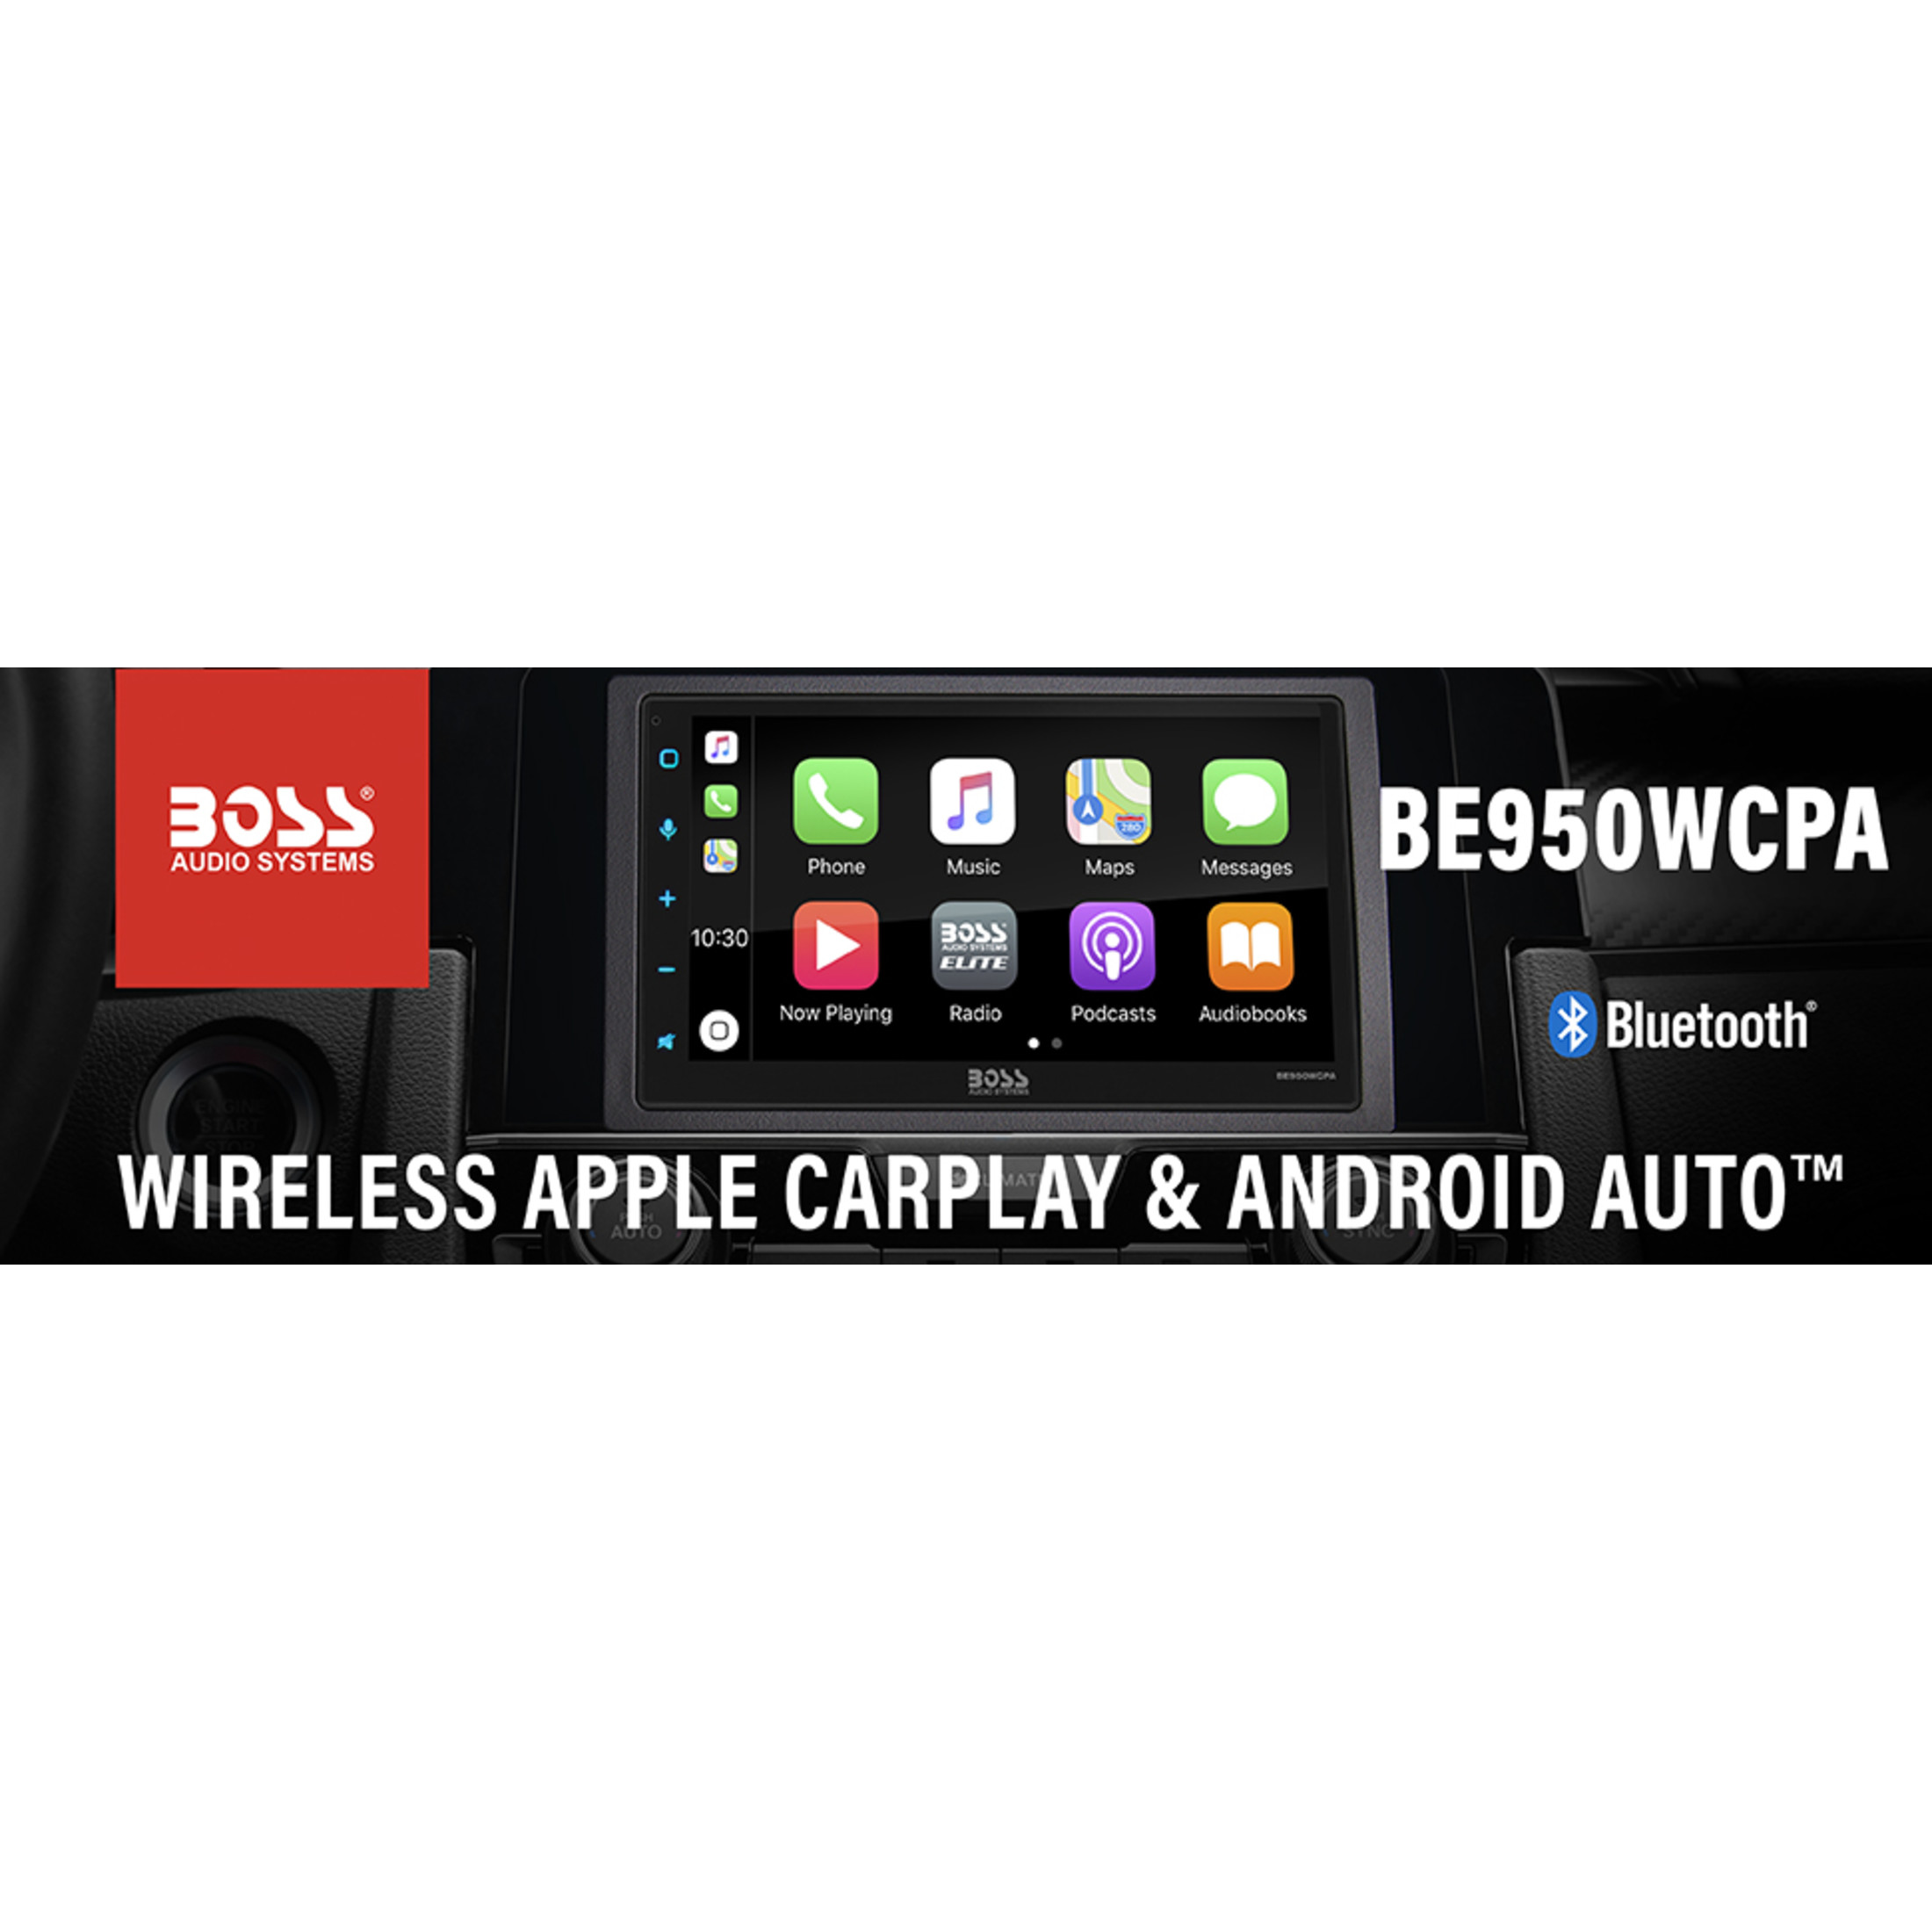 BOSS Audio Systems Elite Series BE950WCPA Car Stereo - Wireless Apple CarPlay & Android Auto, Double Din, 6.75 Inch Touchscreen, Bluetooth, No CD DVD Player, AM/FM Radio Receiver, Wireless Remote - image 3 of 13